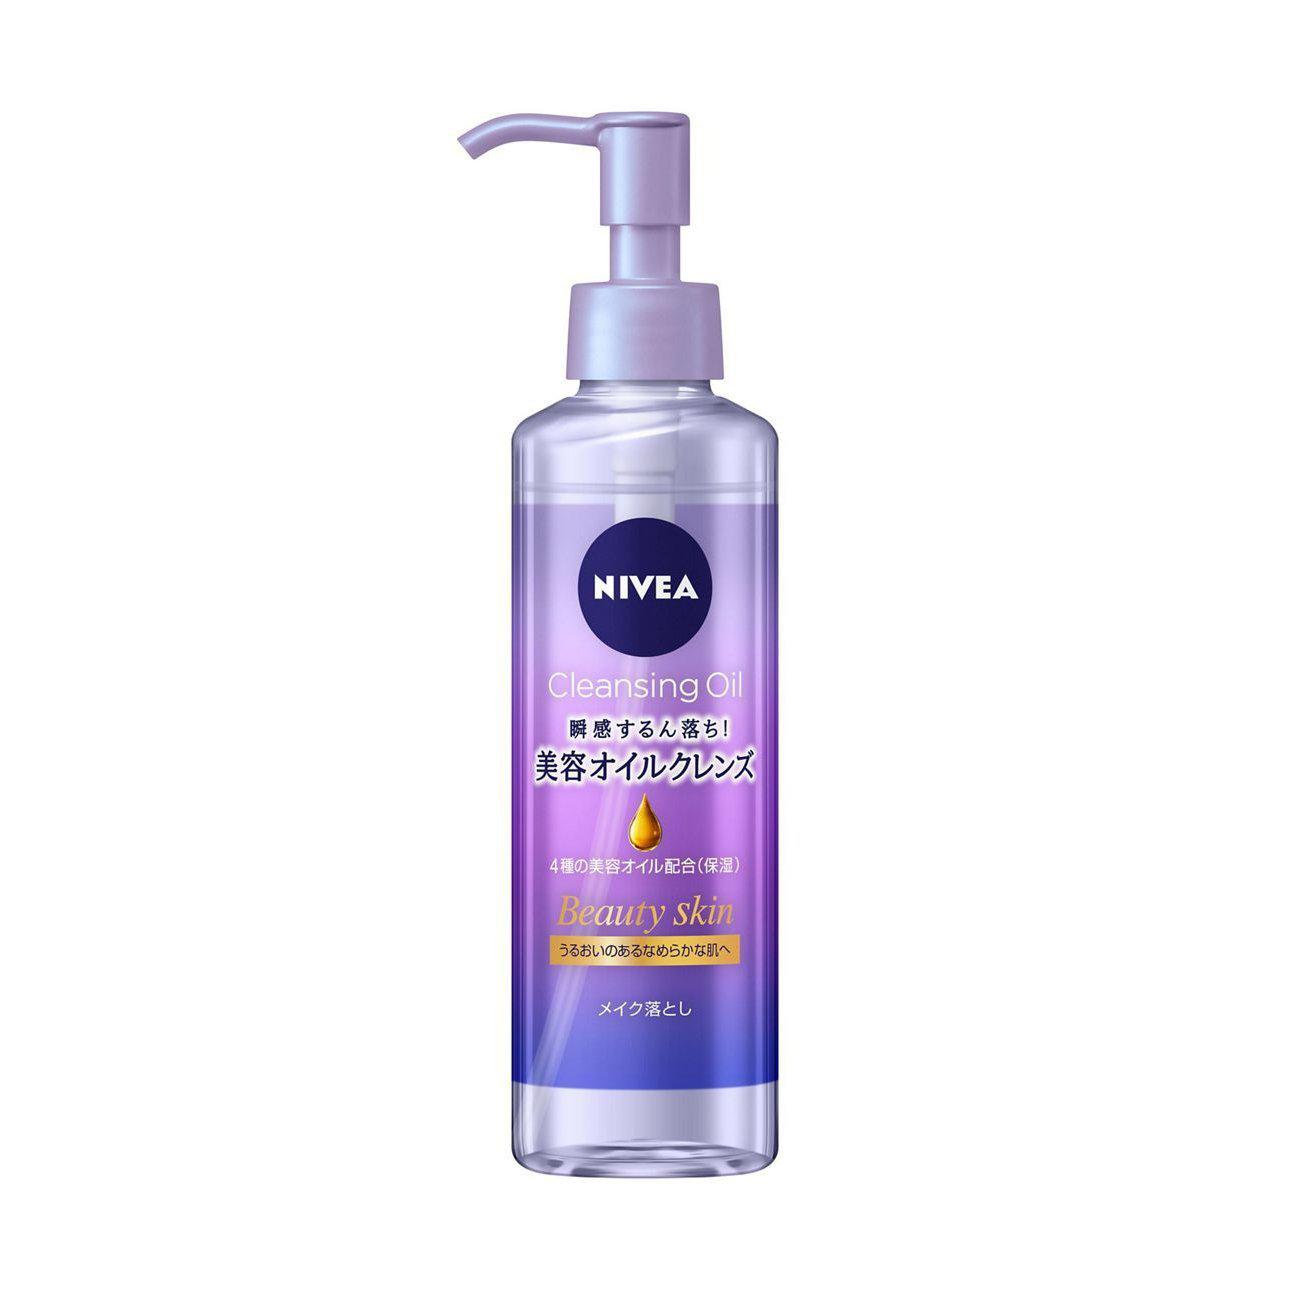 Nivea Cleansing Oil Beauty Skin Makeup Cleanser 195ml